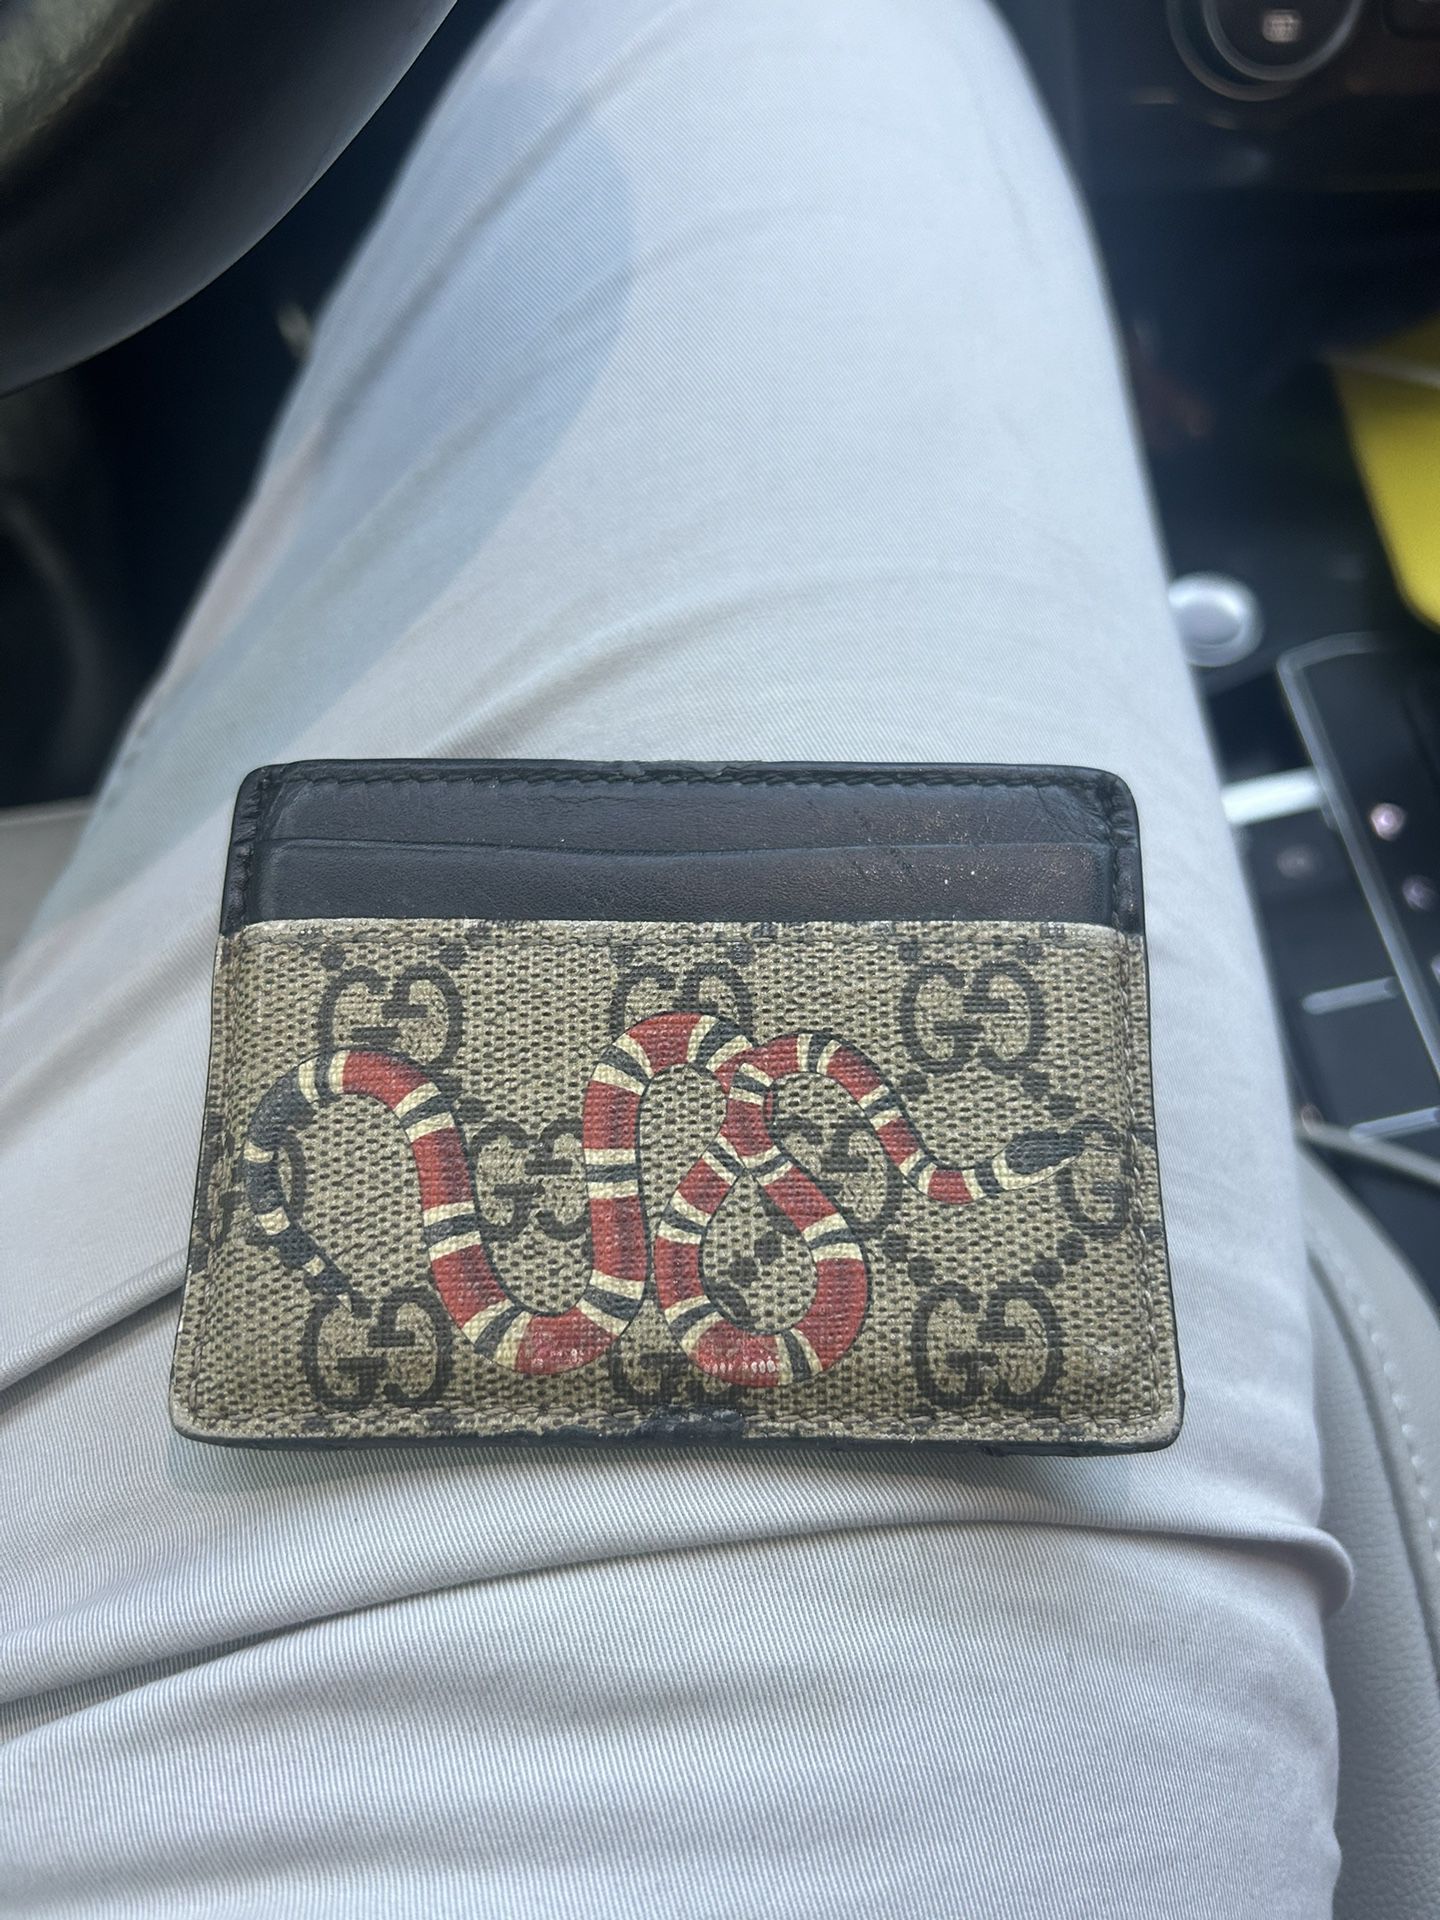 Authentic Gucci Card Holder 